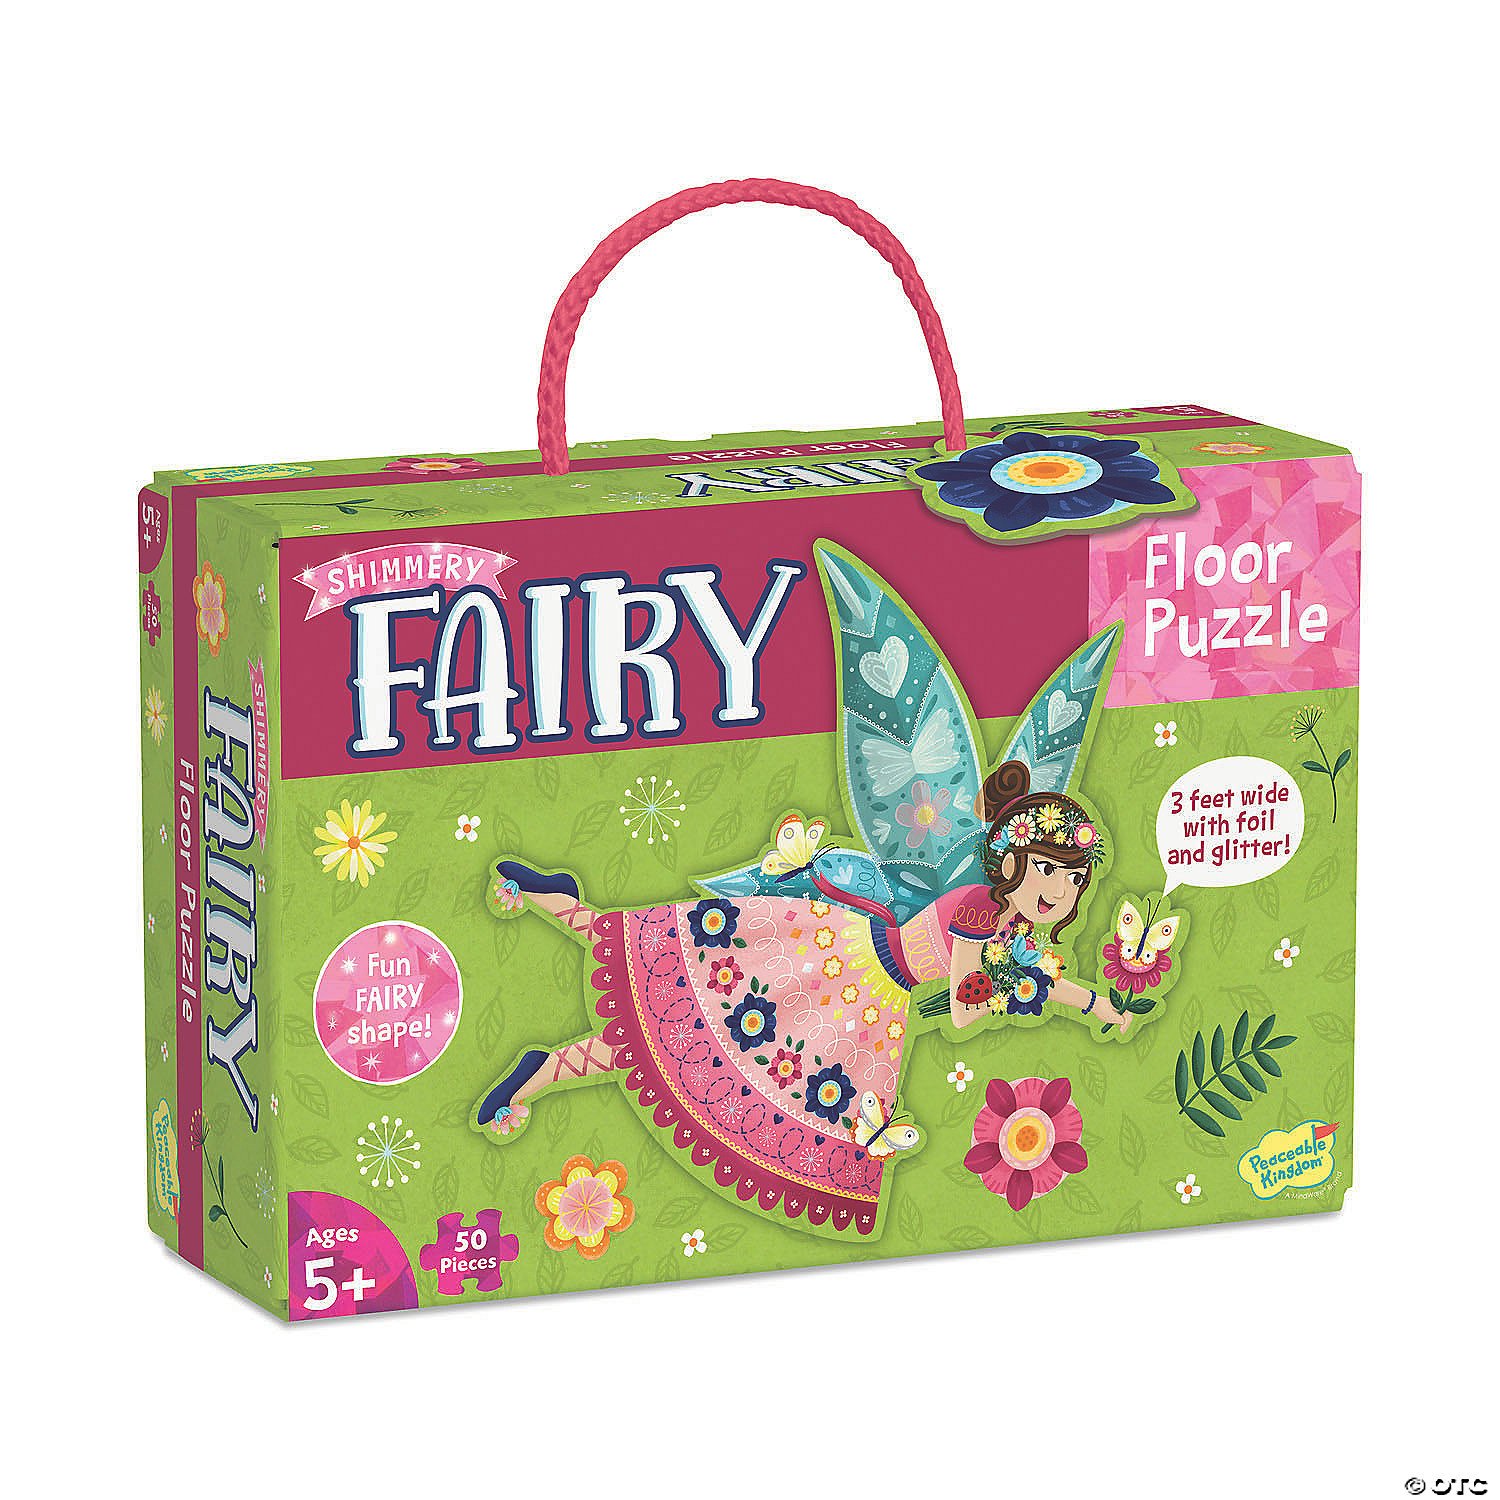 Floor Puzzle Fairy from Peaceable Kingdom shines with shimmering foil